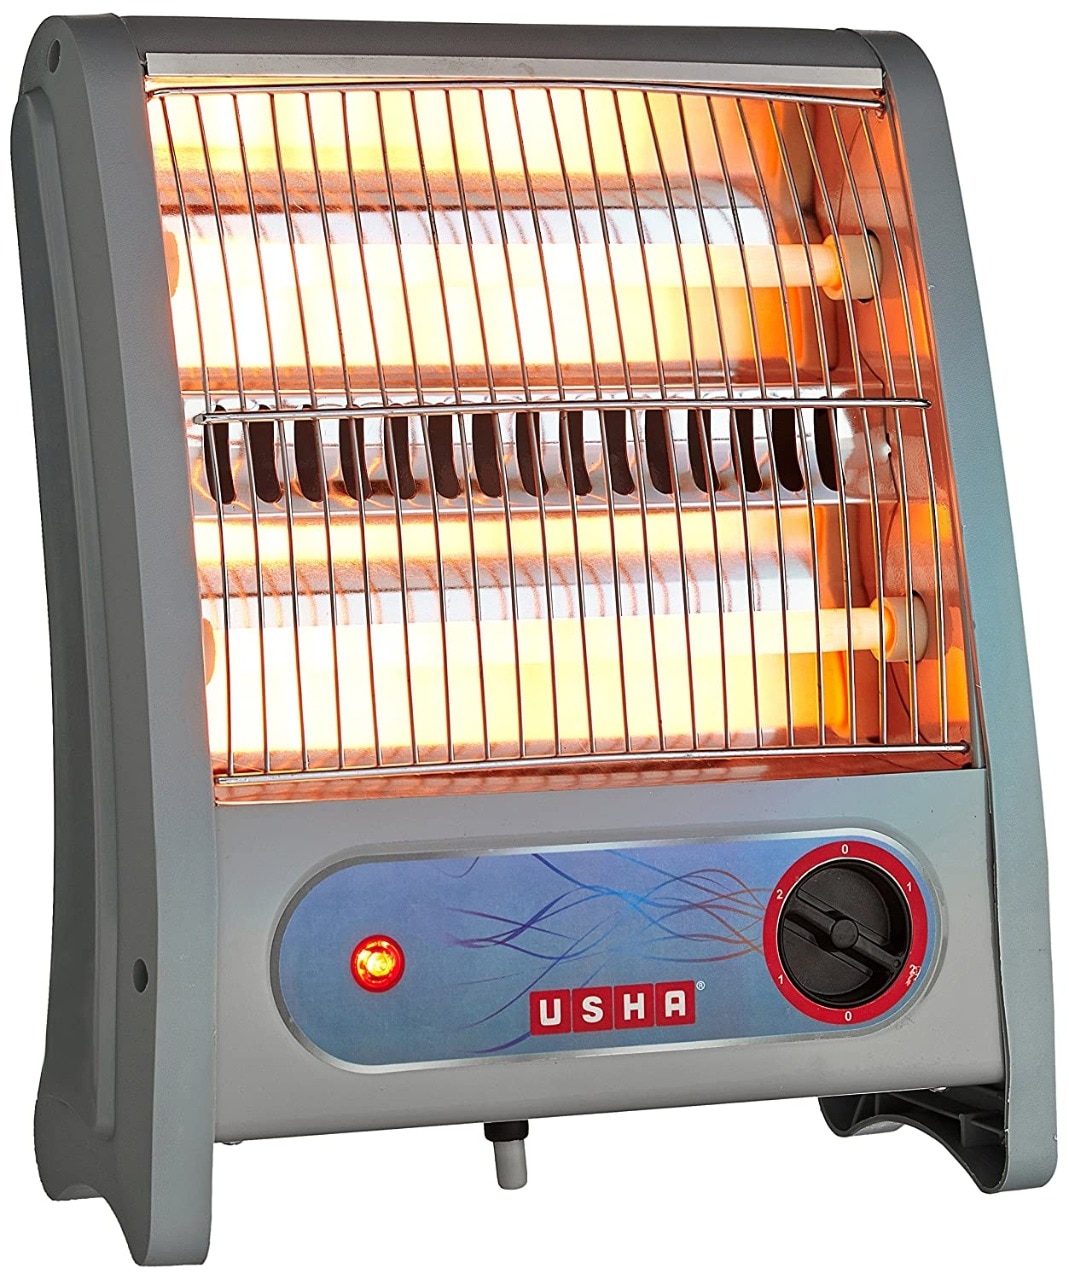 Amazon Sale: Know What Are Infra Halogen Room Heaters?  Best Selling Infra Halogen Room Heater to Buy Cheap from Amazon